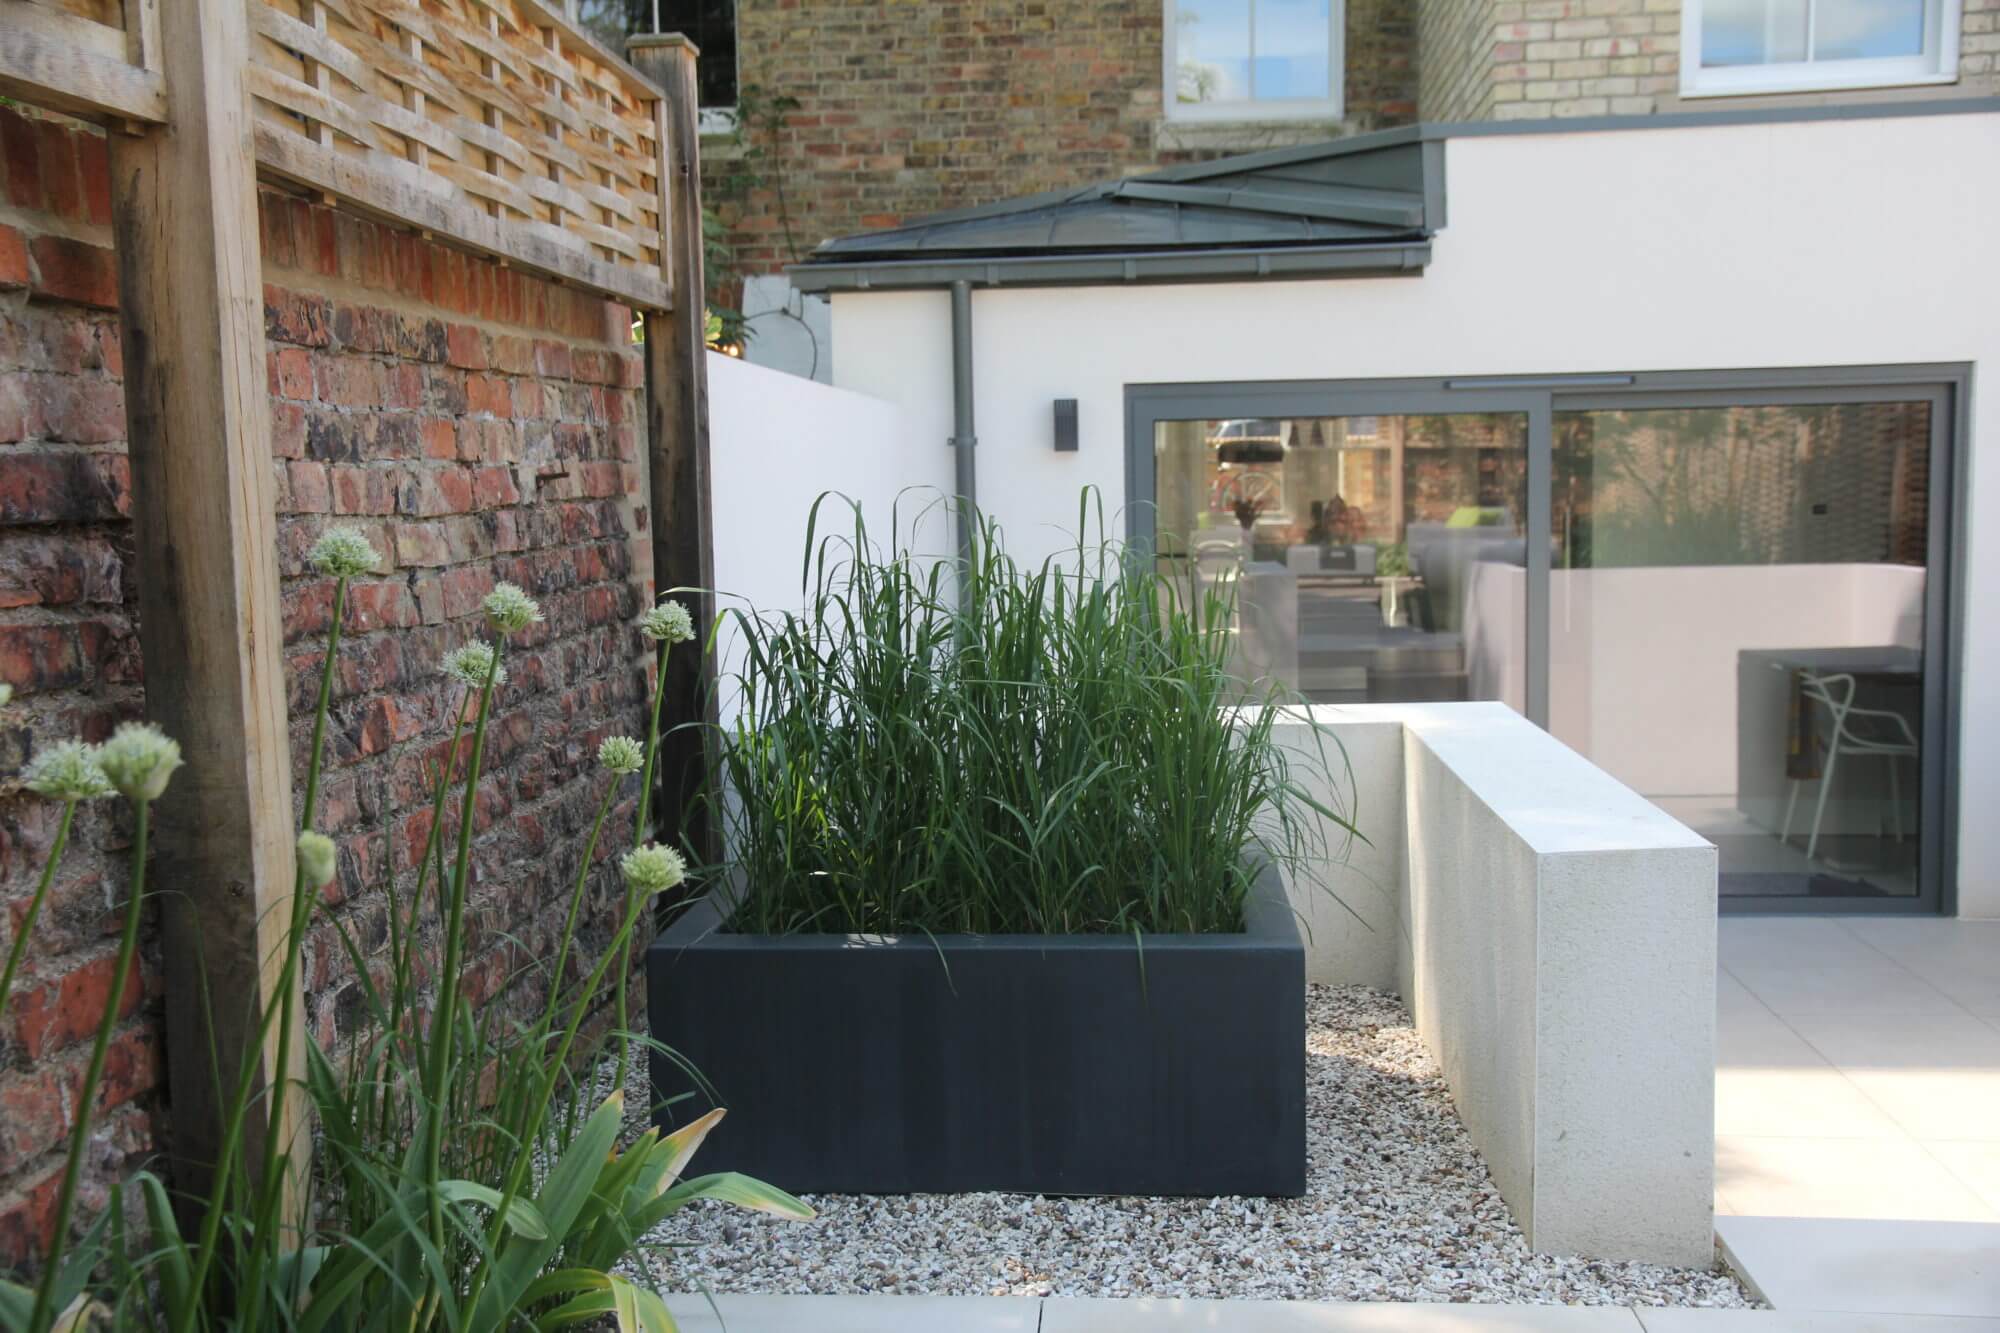 modern Oxford townhouse garden planters and rendered walls with planting